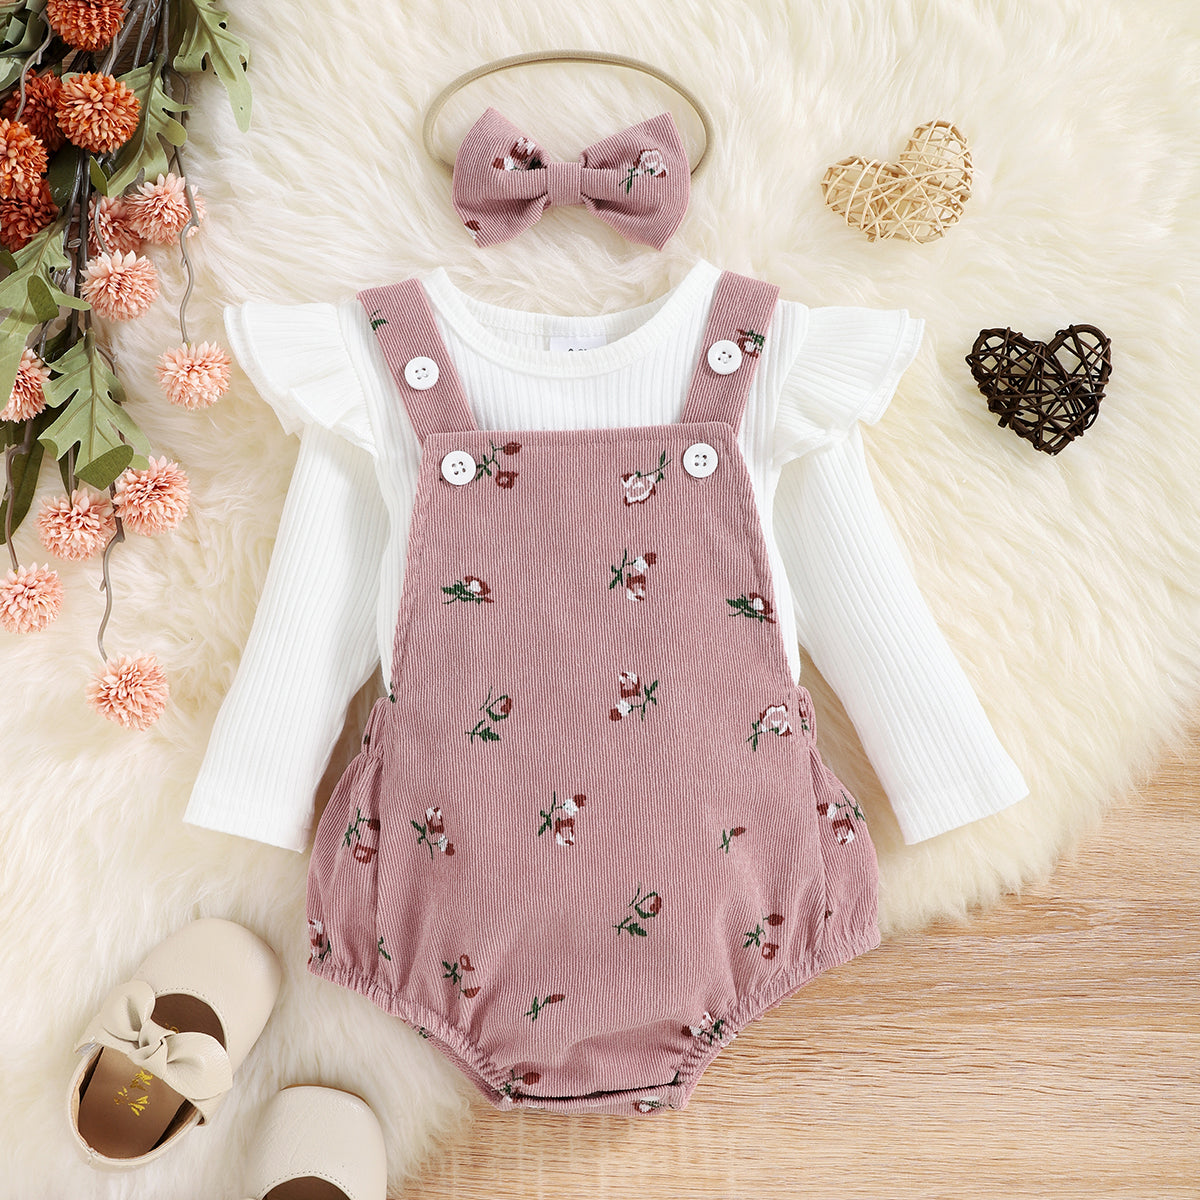 3pcs Baby Girl 95% Cotton Long-sleeve Solid Rib Knit Ruffle Trim Top and Floral Print Romper with Headband Set